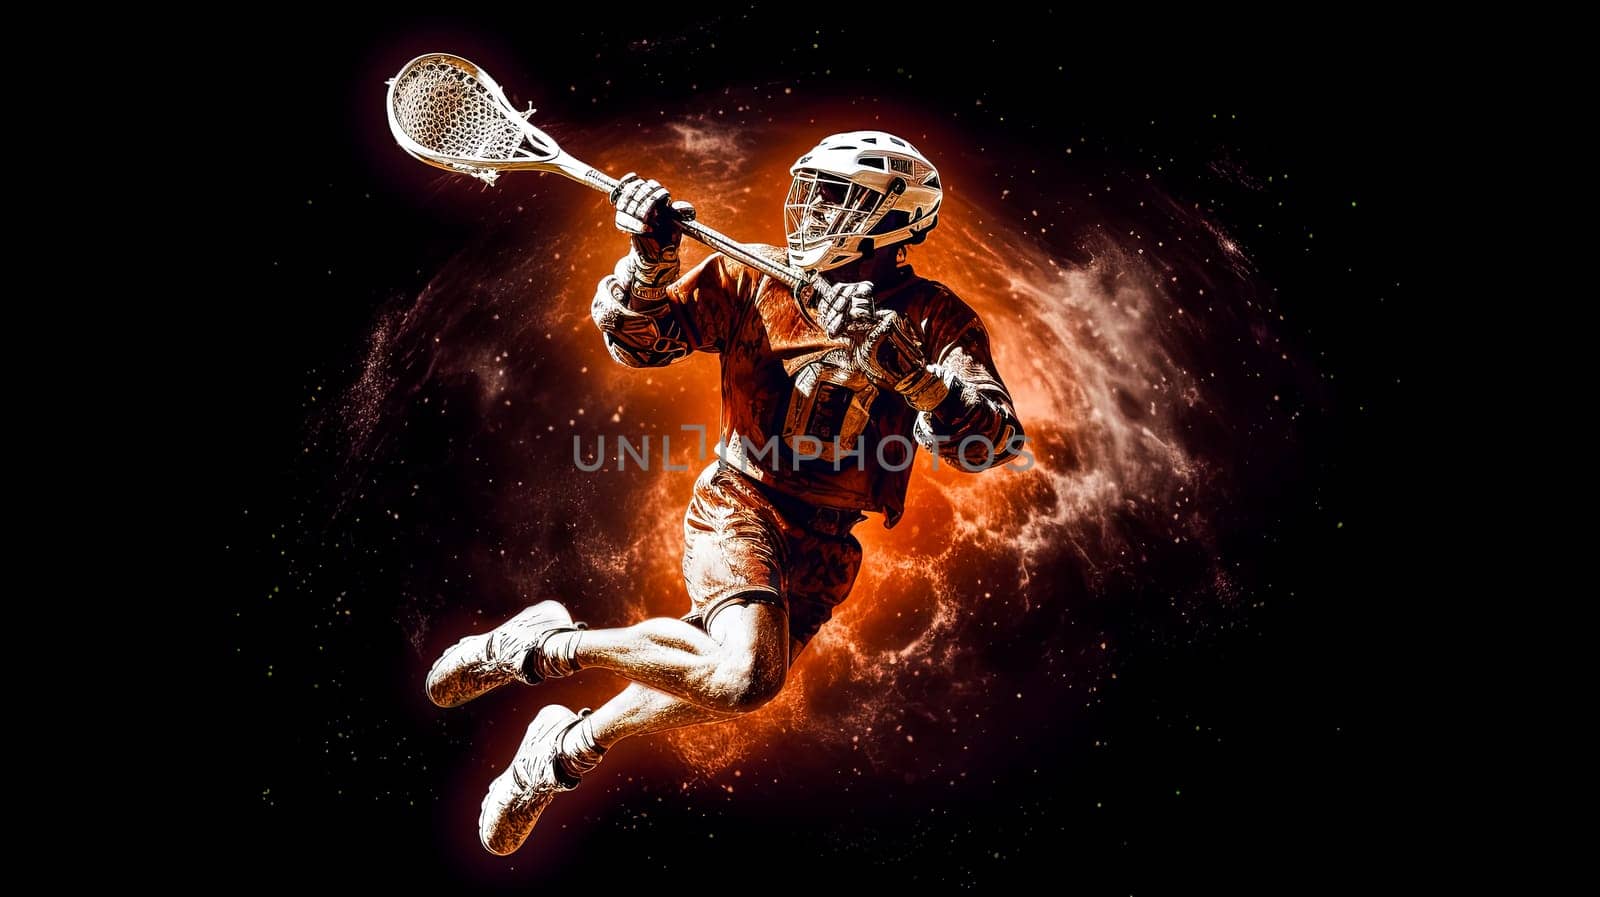 An astronaut playing lacrosse on a beautiful alien planet by Alla_Morozova93